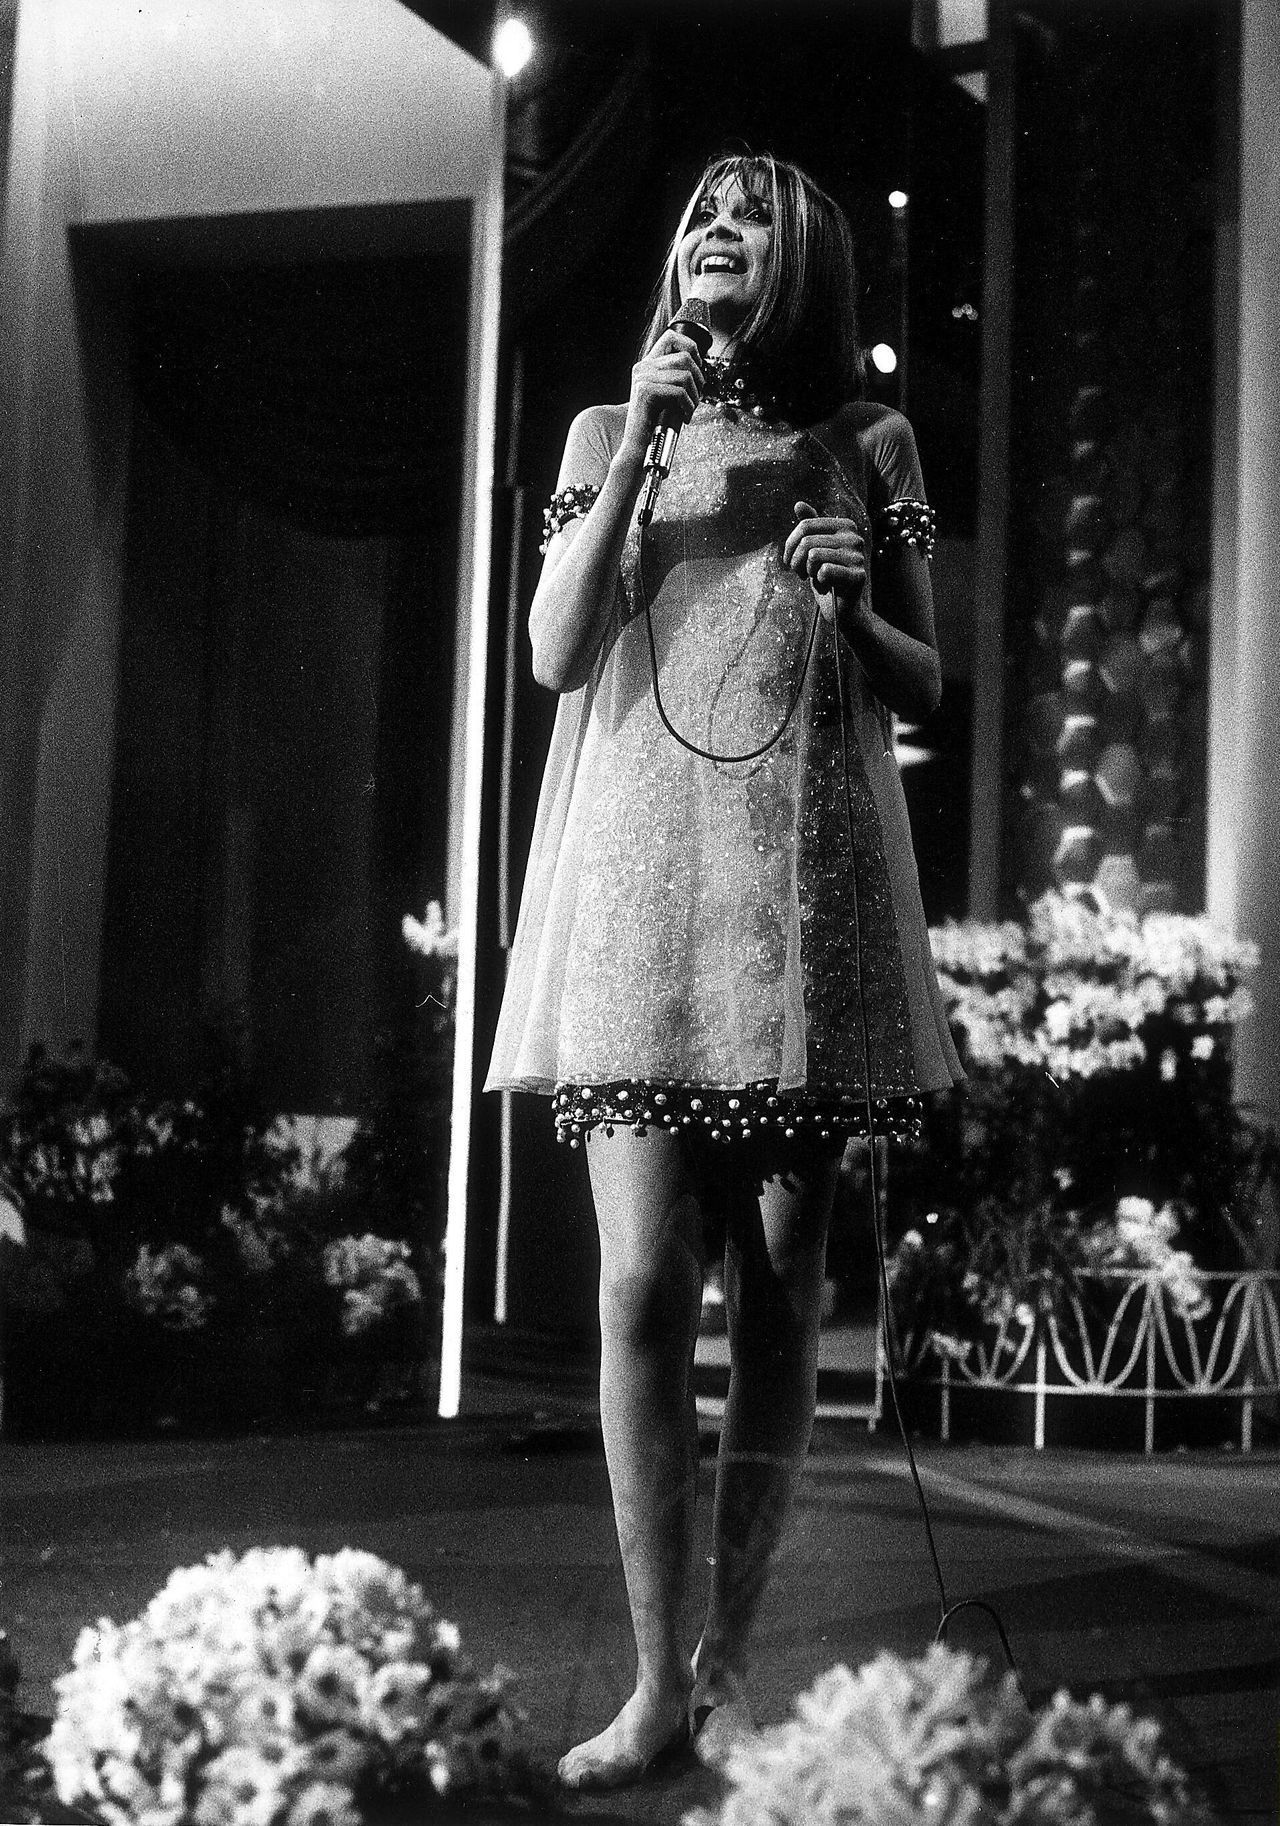 Sandie Shaw performing Puppet On A String in 1967